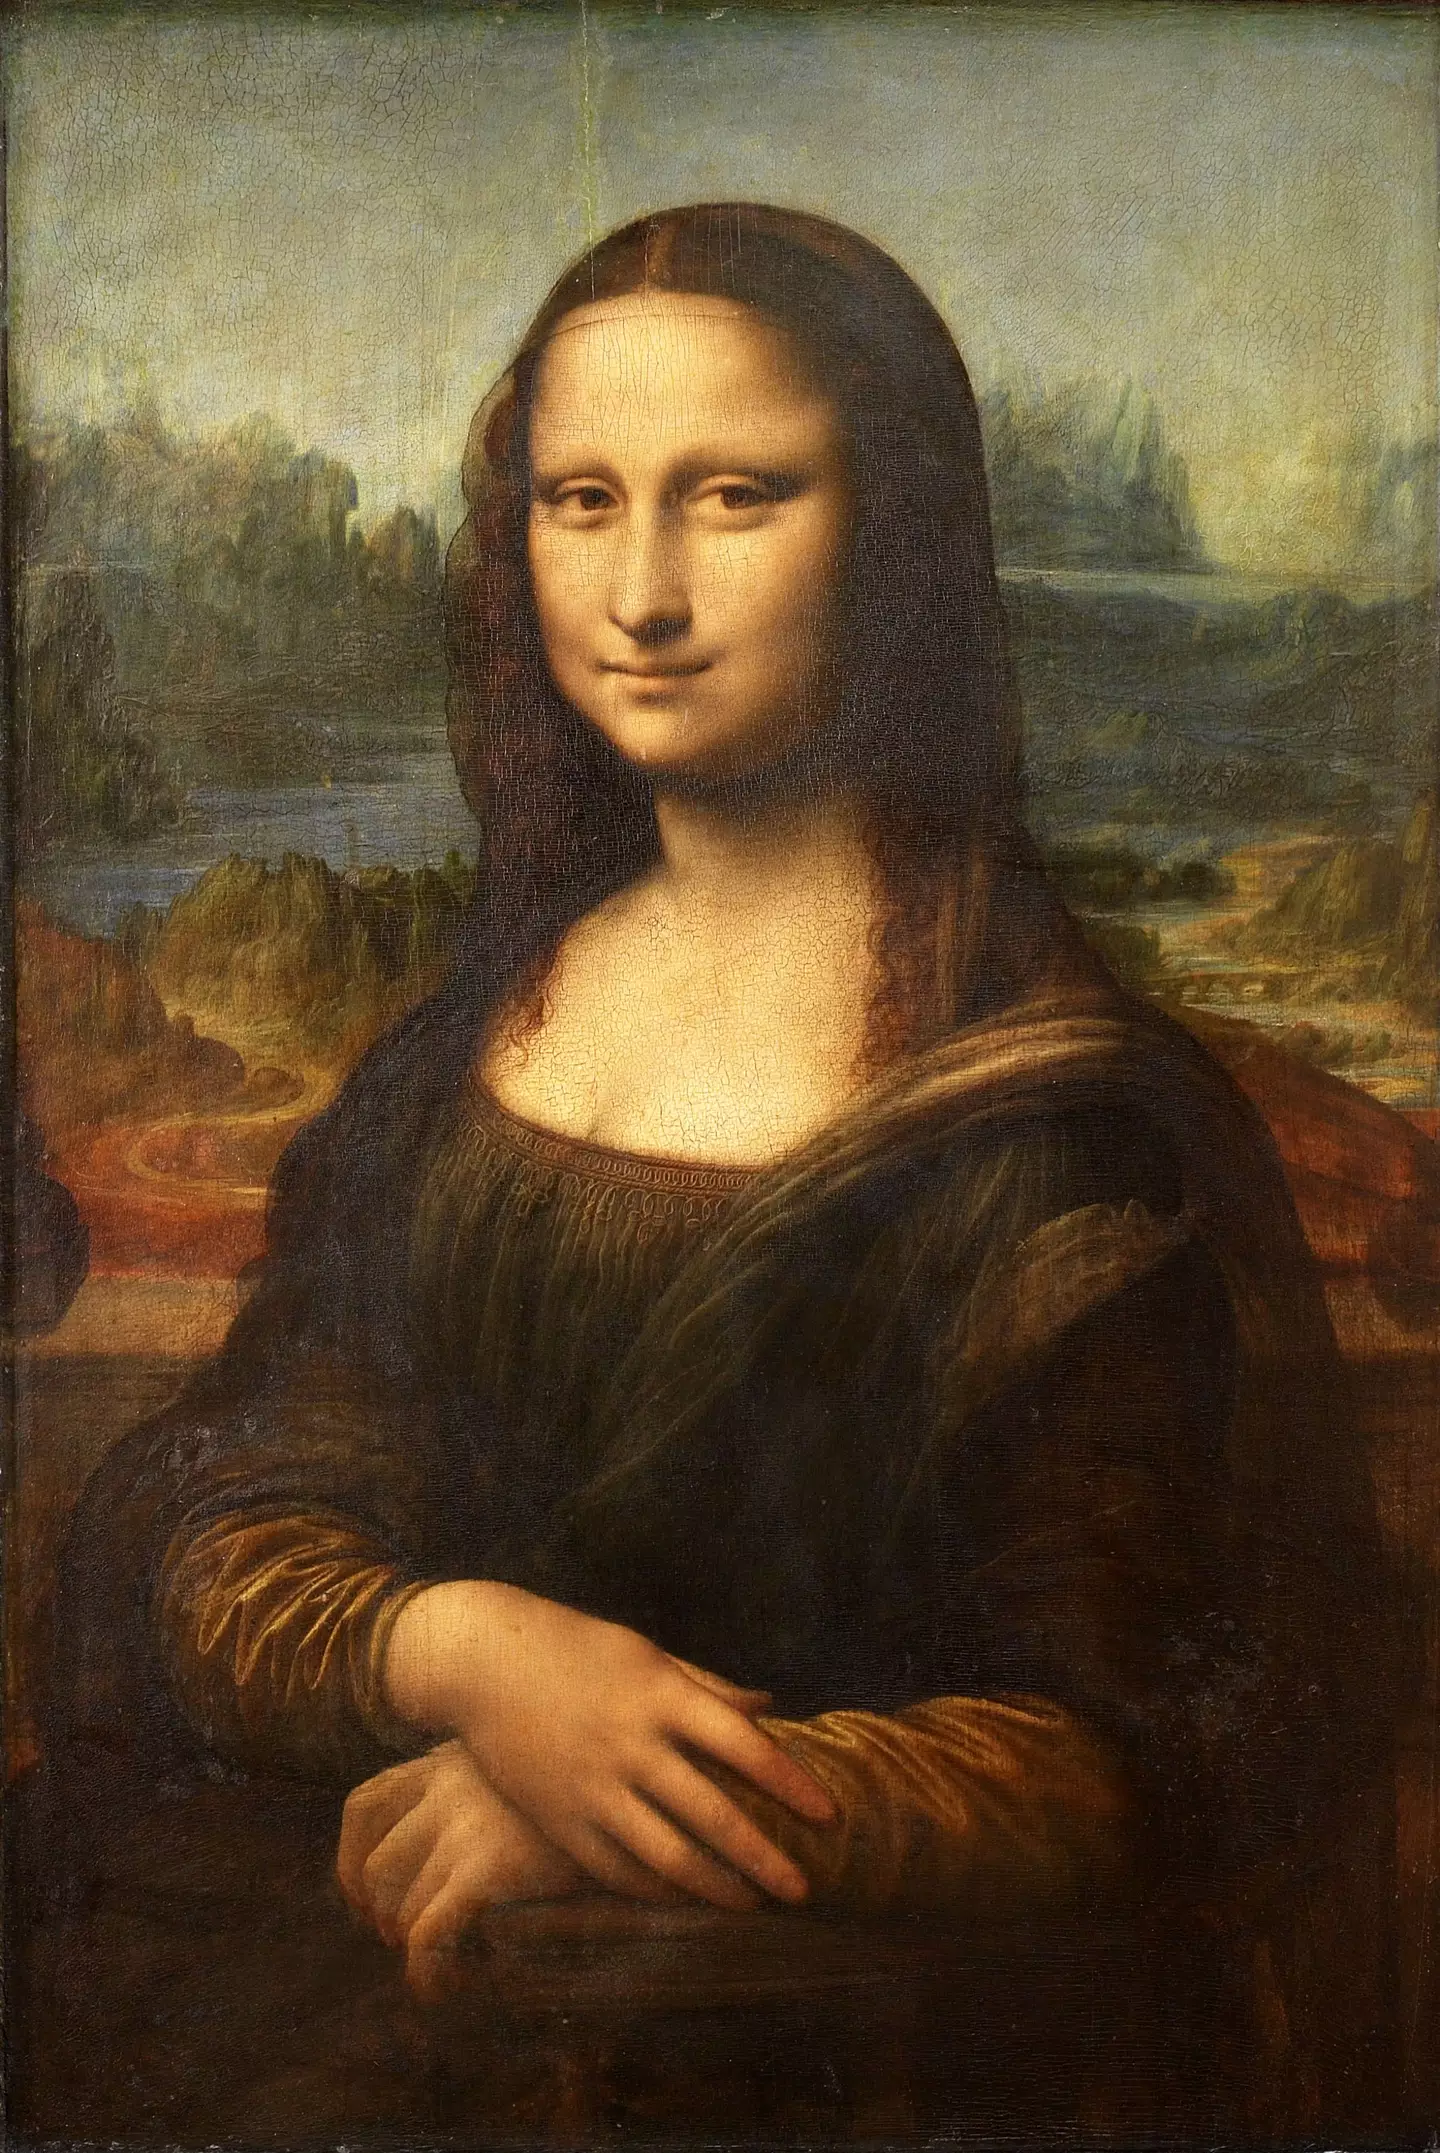 Leonardo Da Vinci's Mona Lisa is arguably the most famous painting in the world.